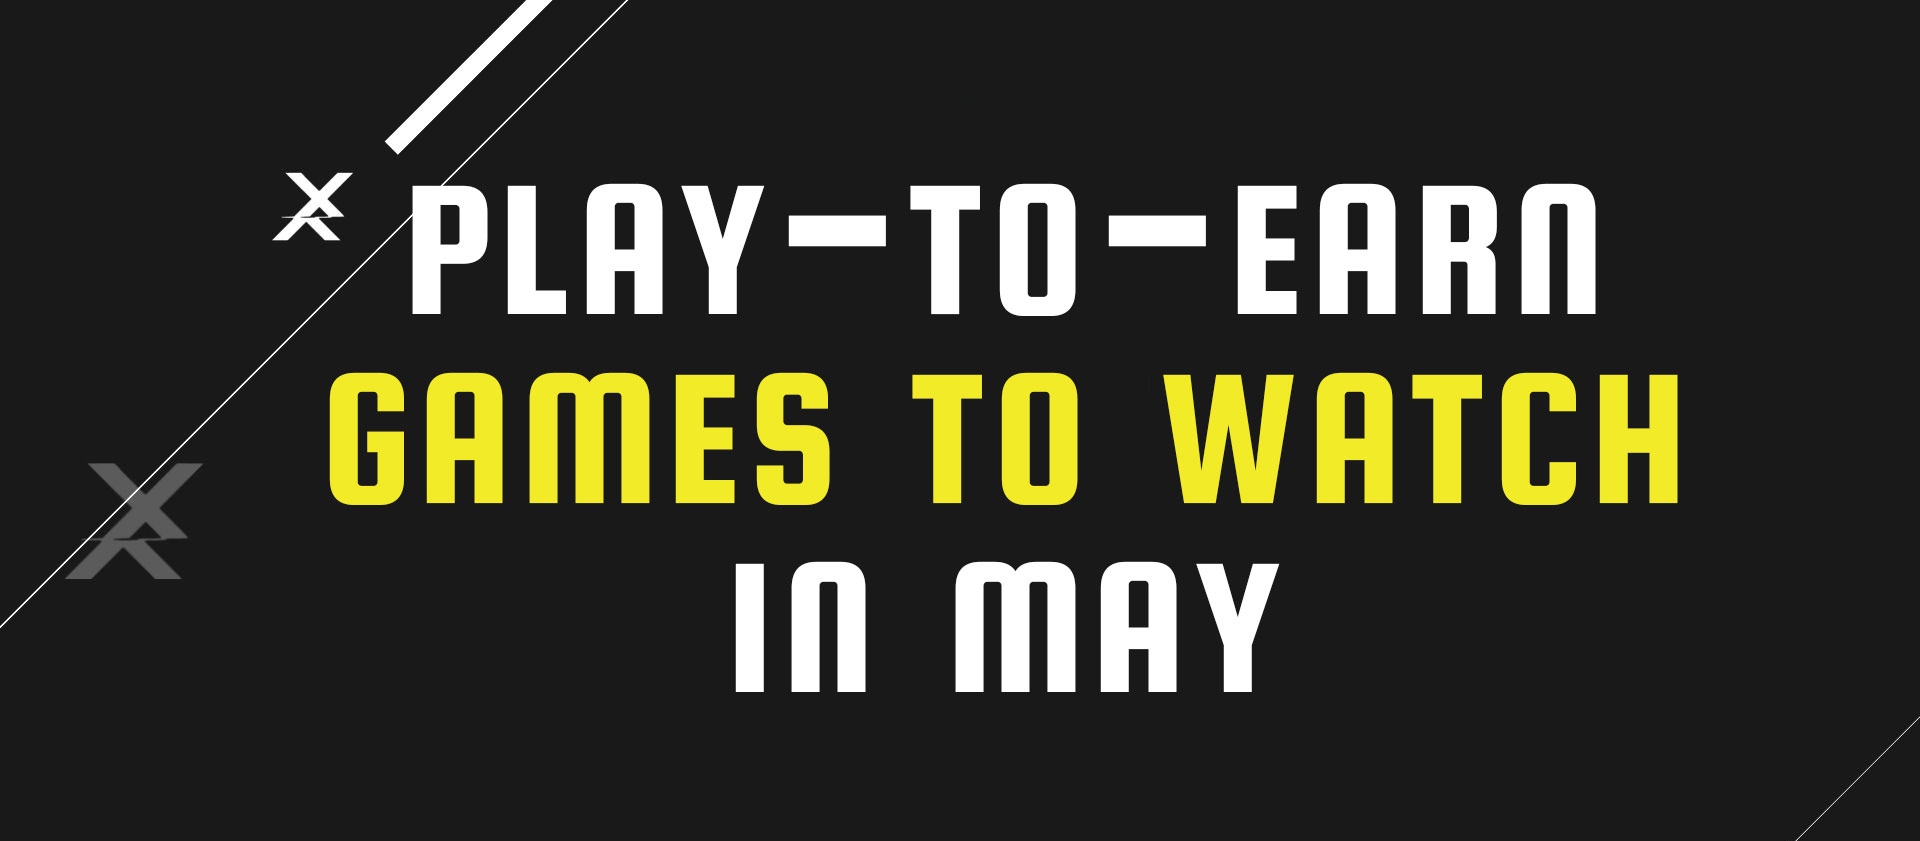 games to watch may